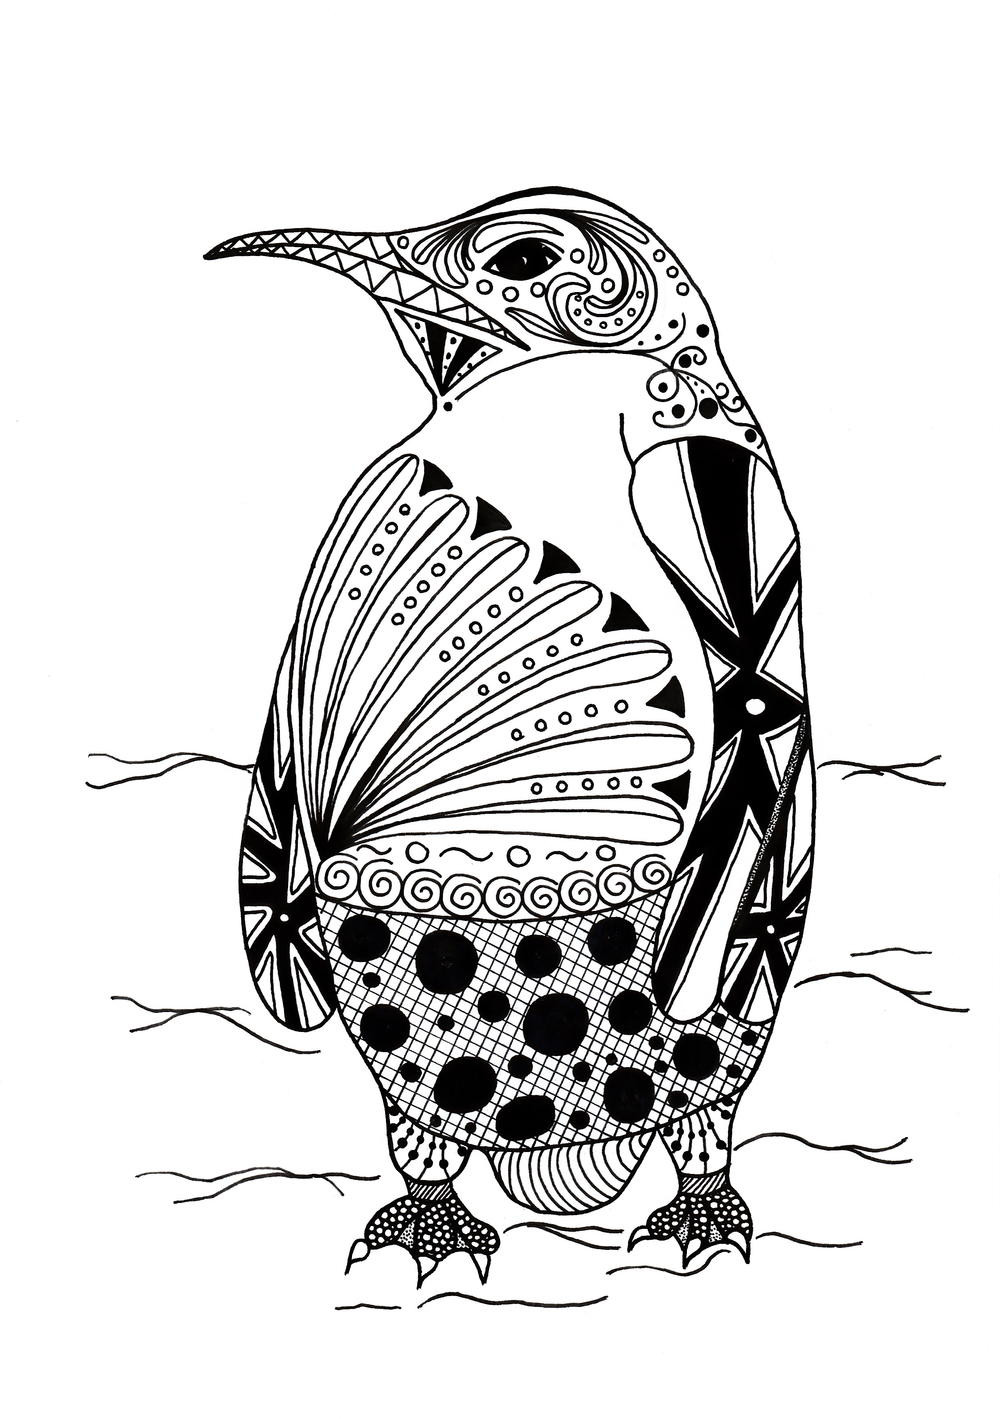 Cute Animal Coloring Pages For Adults
 Intricate Penguin Adult Coloring Page